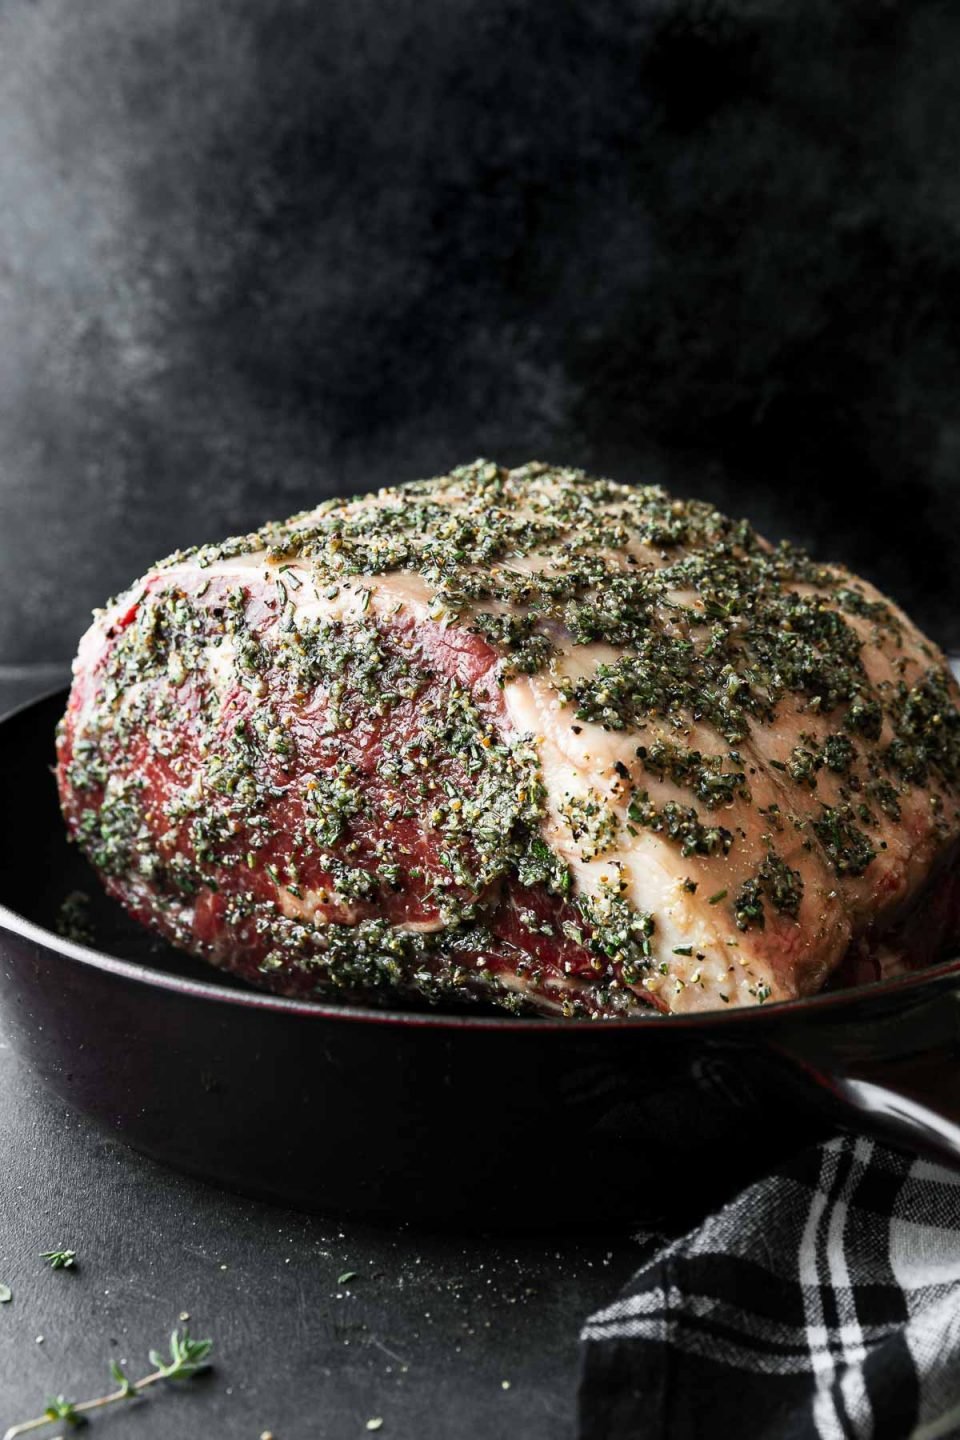 An uncooked bone-in standing prime rib roast seasoned with a garlic herb butter sits inside a red Staub Deep Skillet. The skillet sits atop a dark textured surface with pieces of fresh herbs and a black and white plaid linen napkin resting alongside. The roast sits in front of a dark textured background.